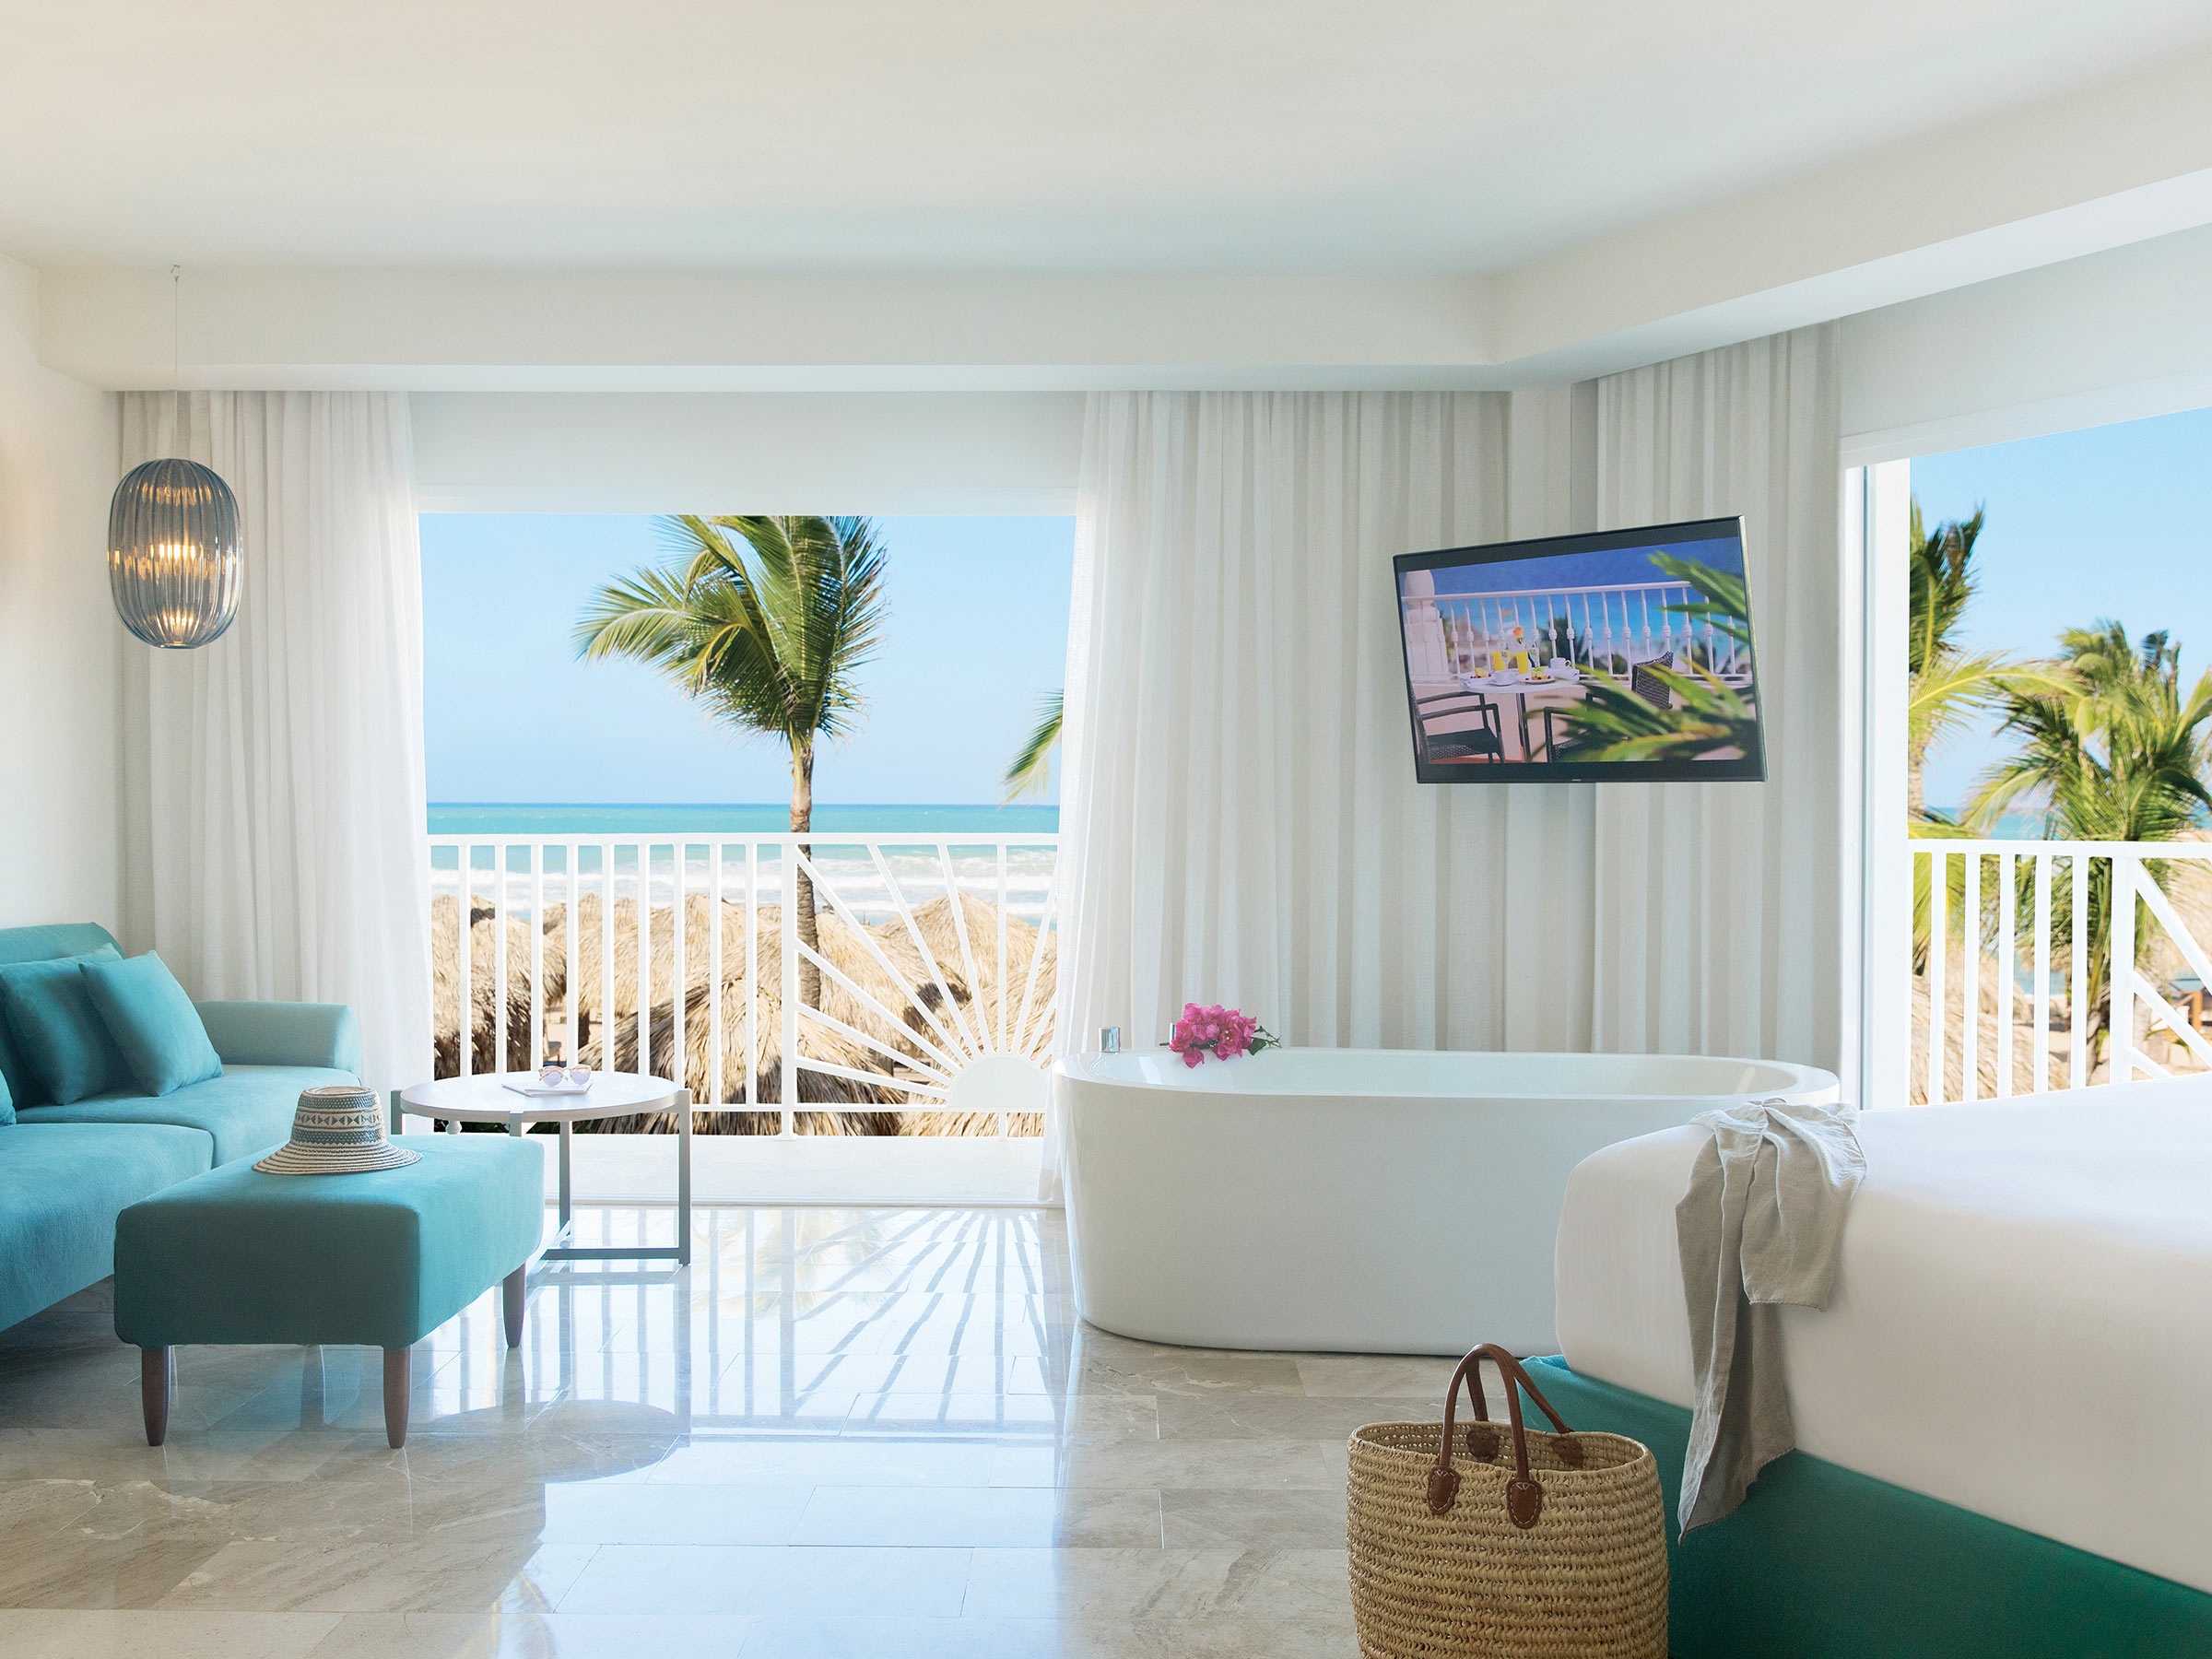 Excellence Punta Cana Suite with an Ocean View